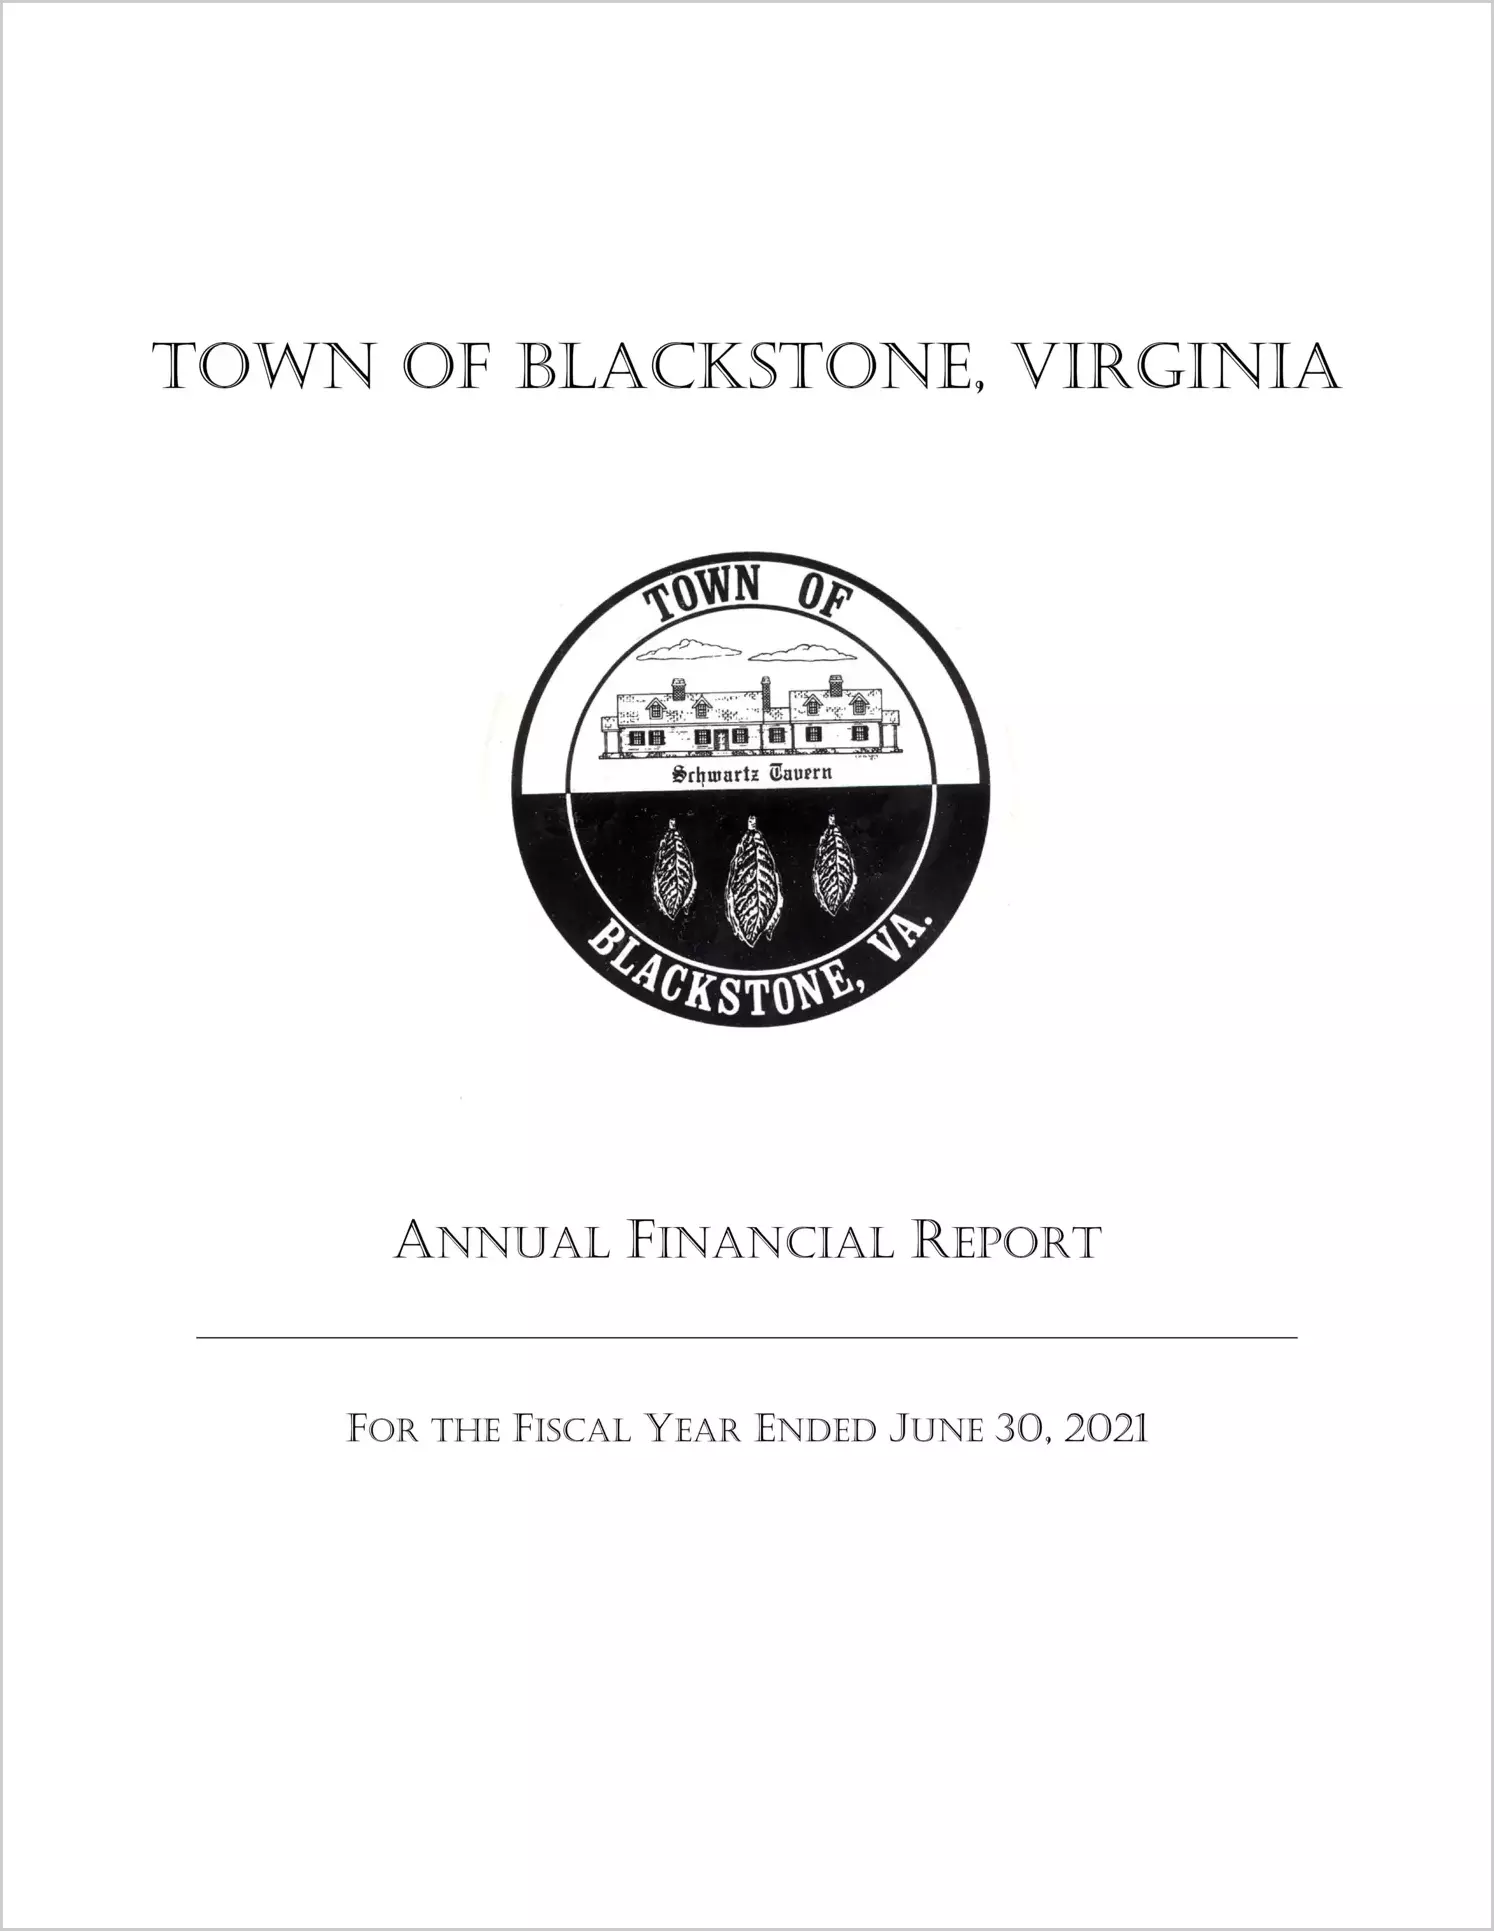 2021 Annual Financial Report for Town of Blackstone